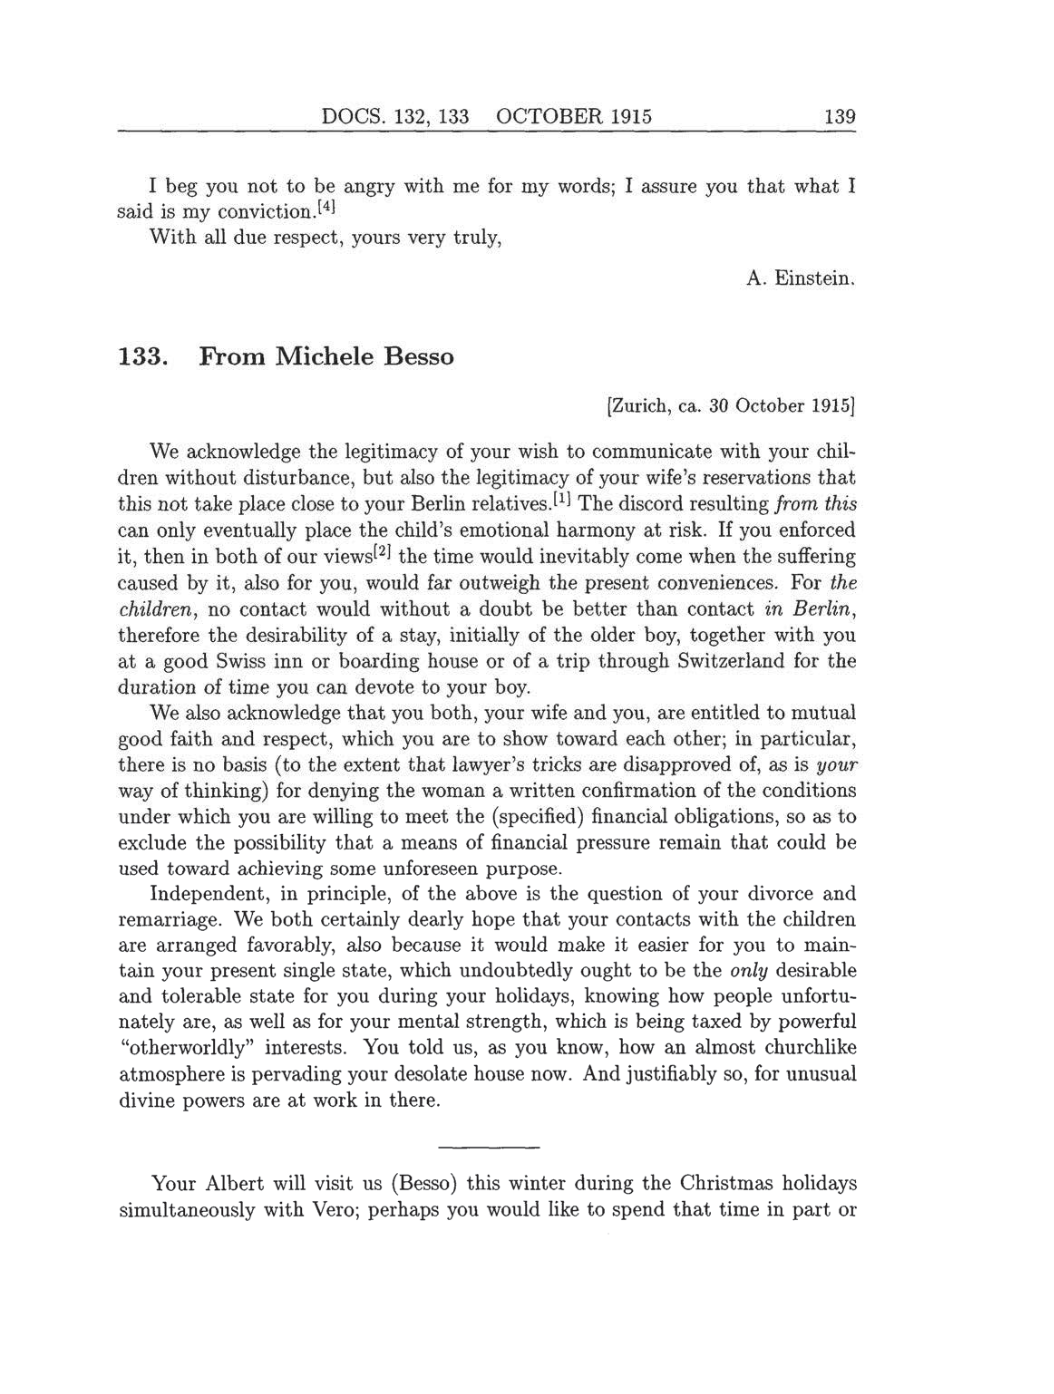 Volume 8: The Berlin Years: Correspondence, 1914-1918 (English translation supplement) page 139